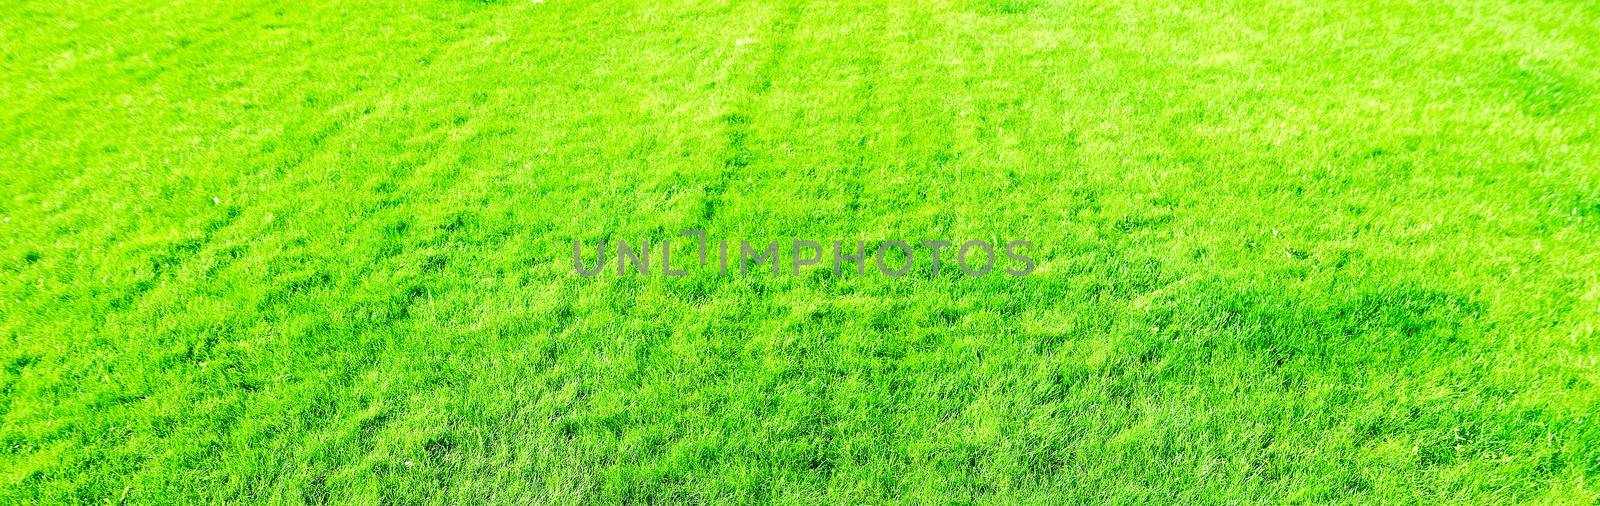 Grass field background, perfect backyard lawn by Anneleven